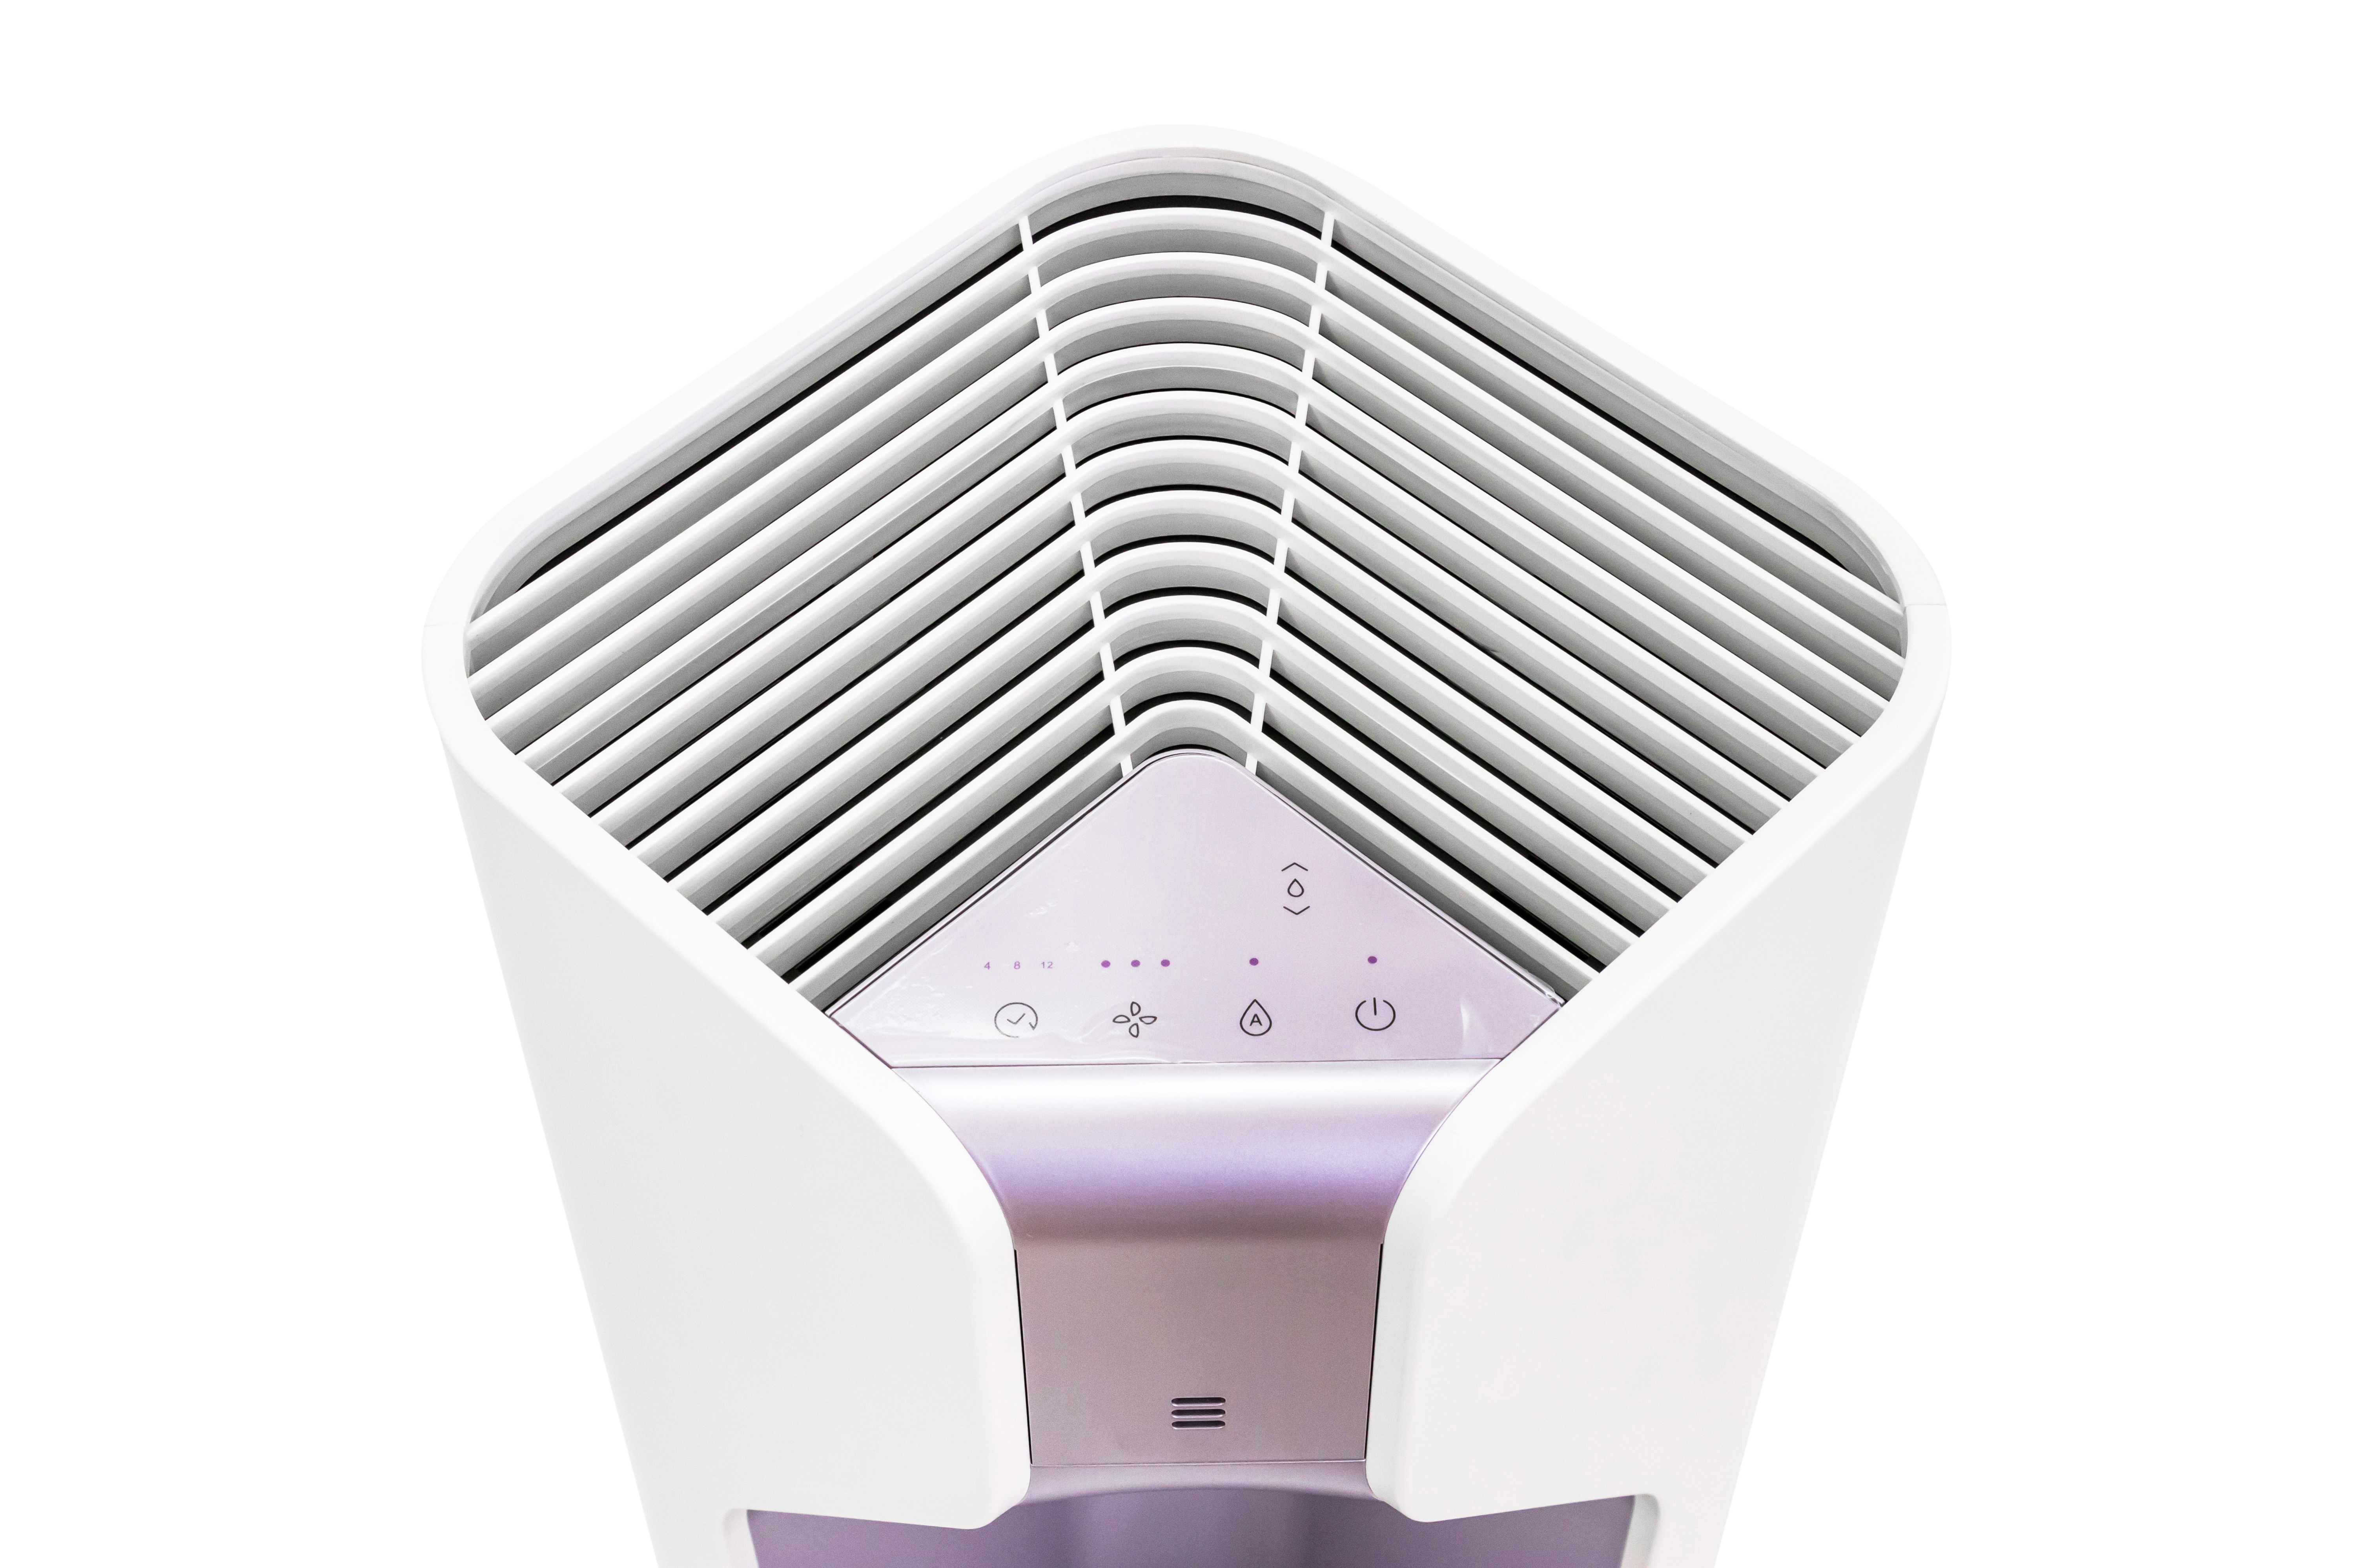 Top Fill Type Humidifier with Large Water Tank, Model 31918